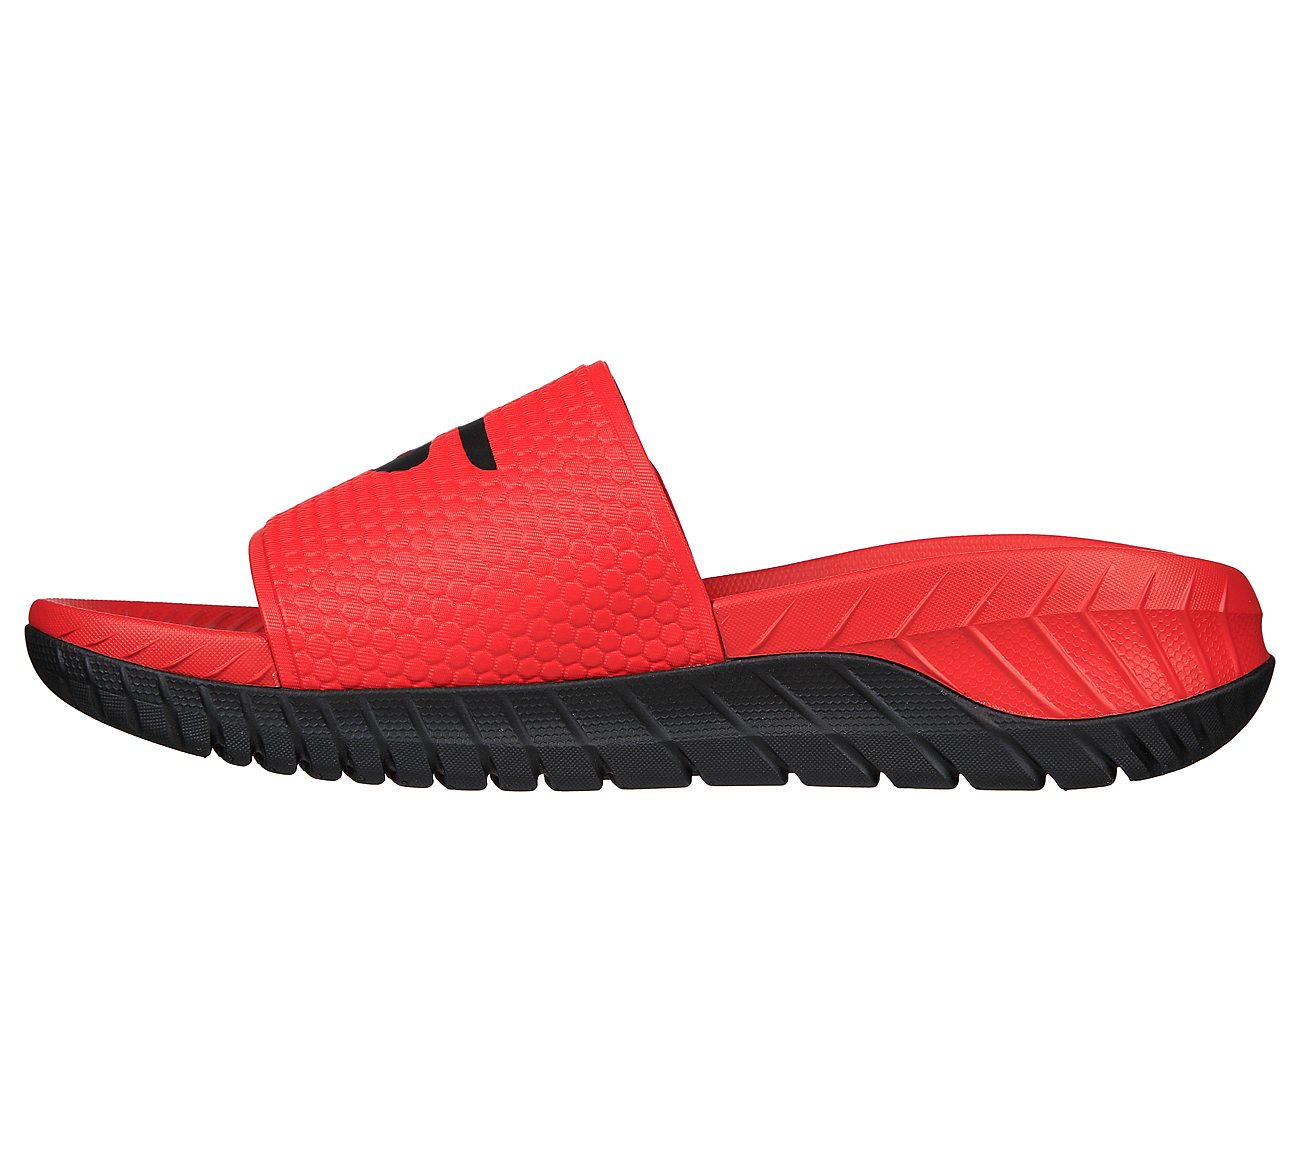 GO RECOVER SANDAL, RED/BLACK Footwear Left View